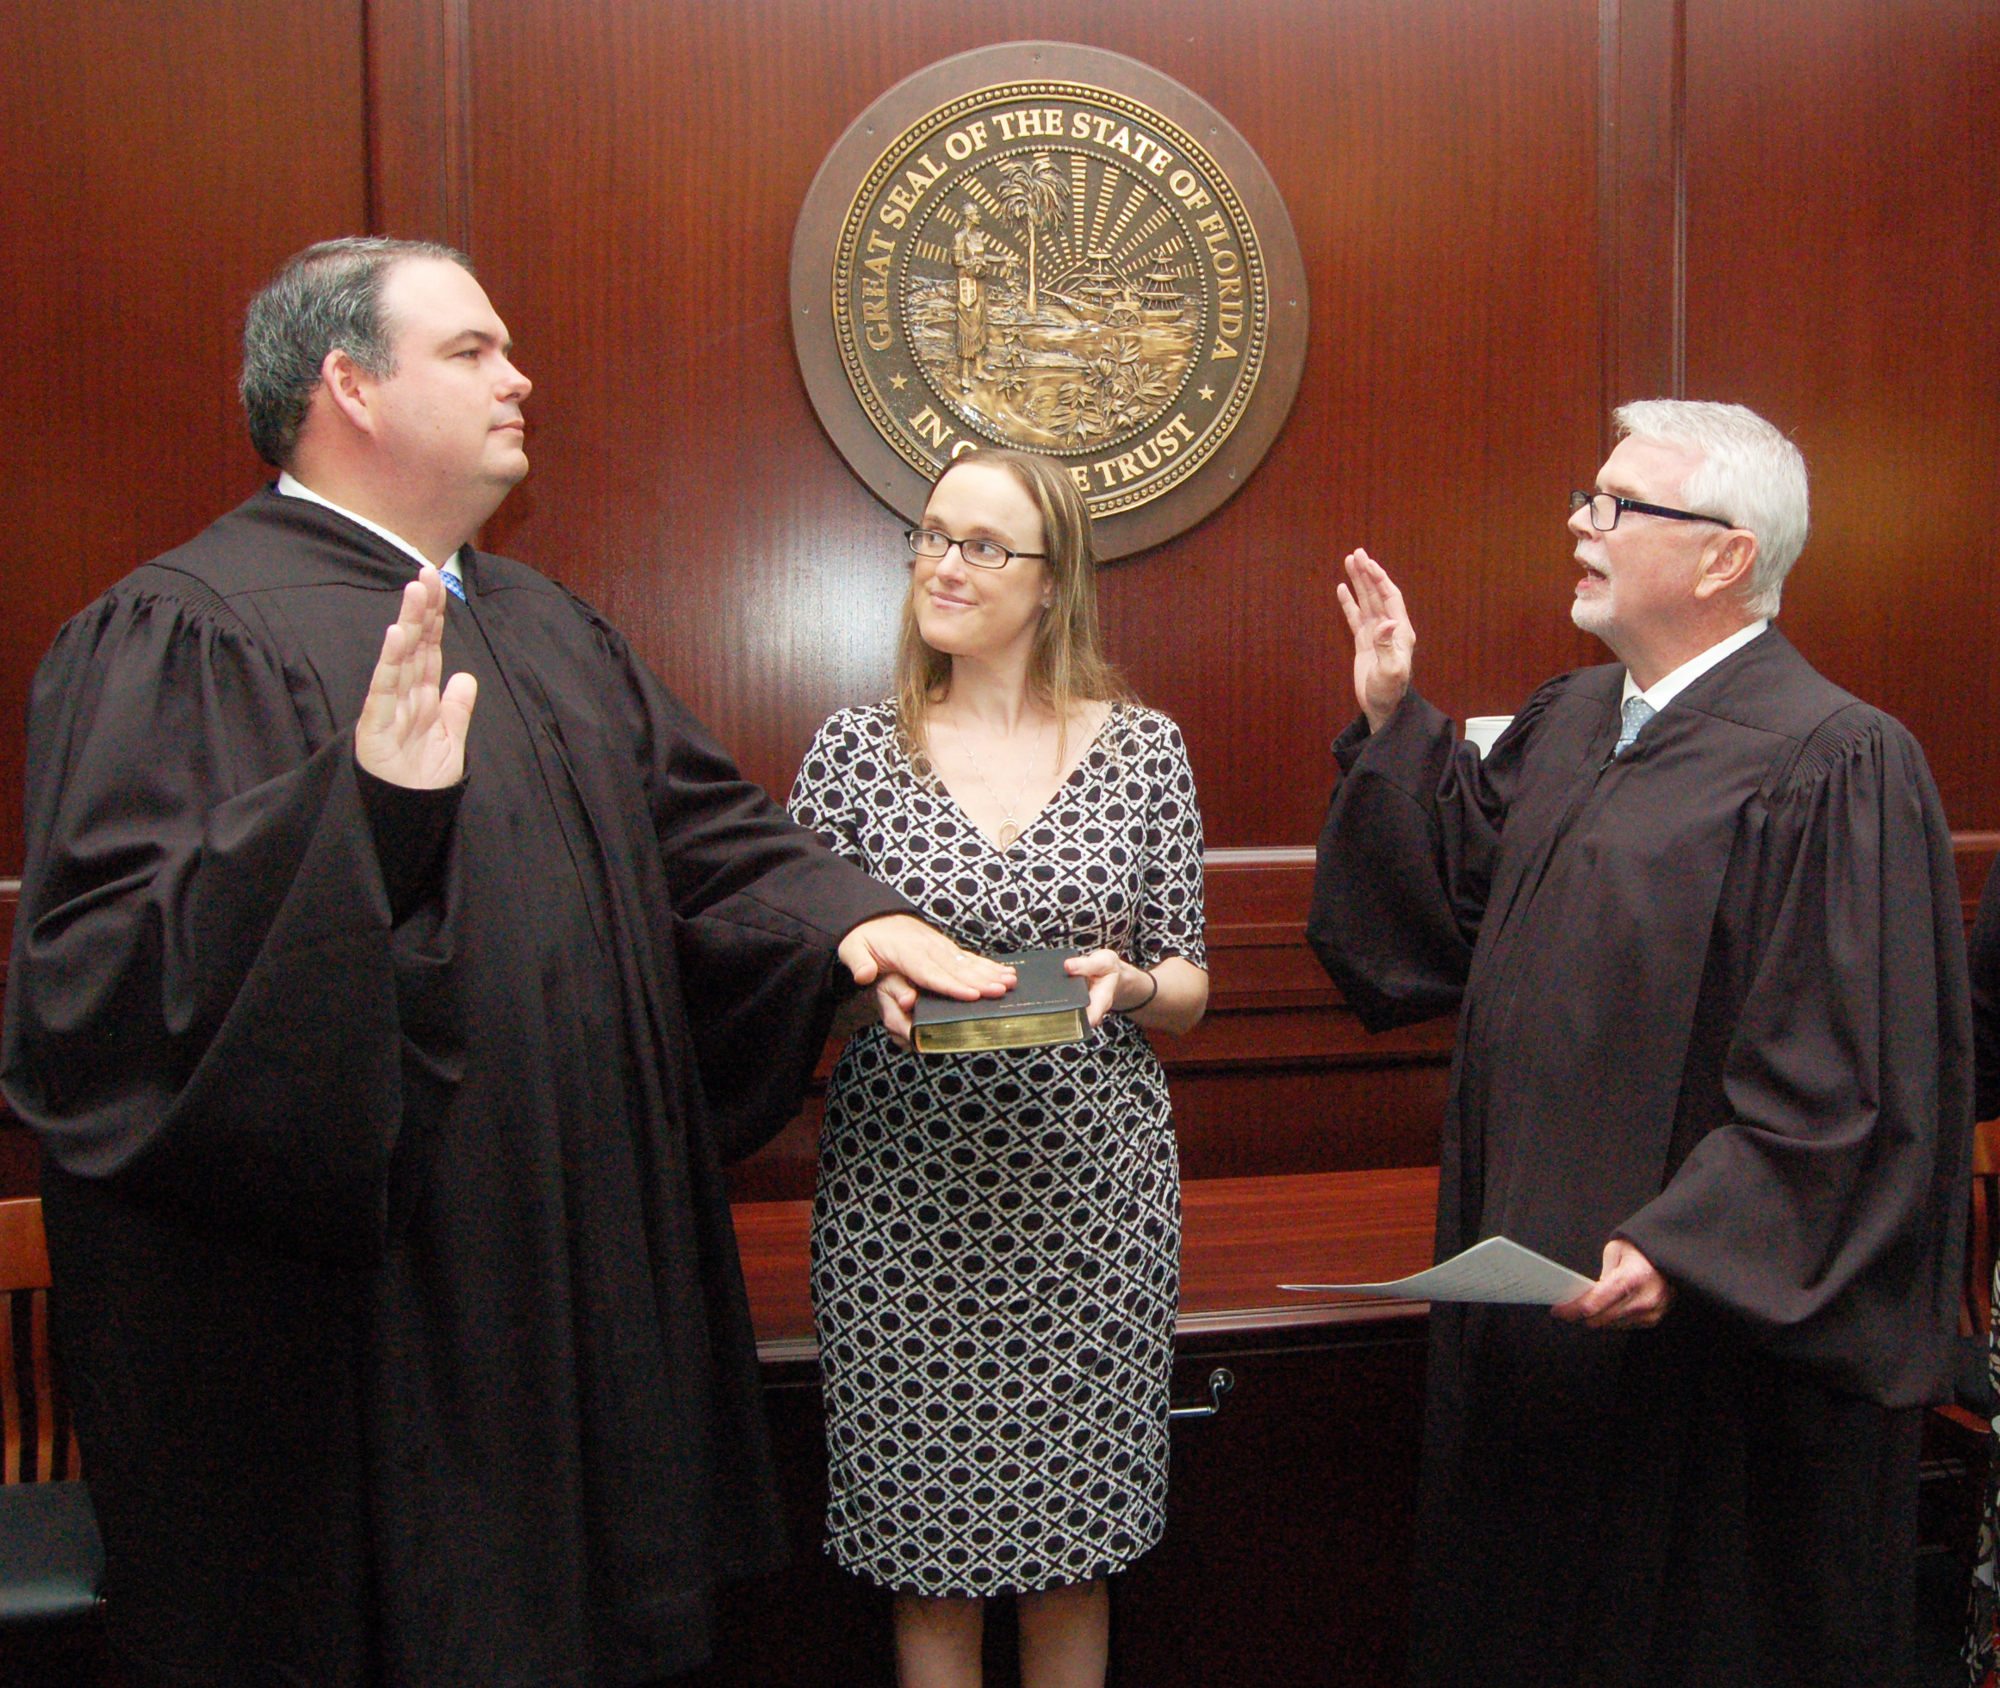 Helen Peacock Roberson holds the Bible as her husband, Circuit Judge Eric Roberson, left, is sworn in by Chief Judge Mark Mahon.